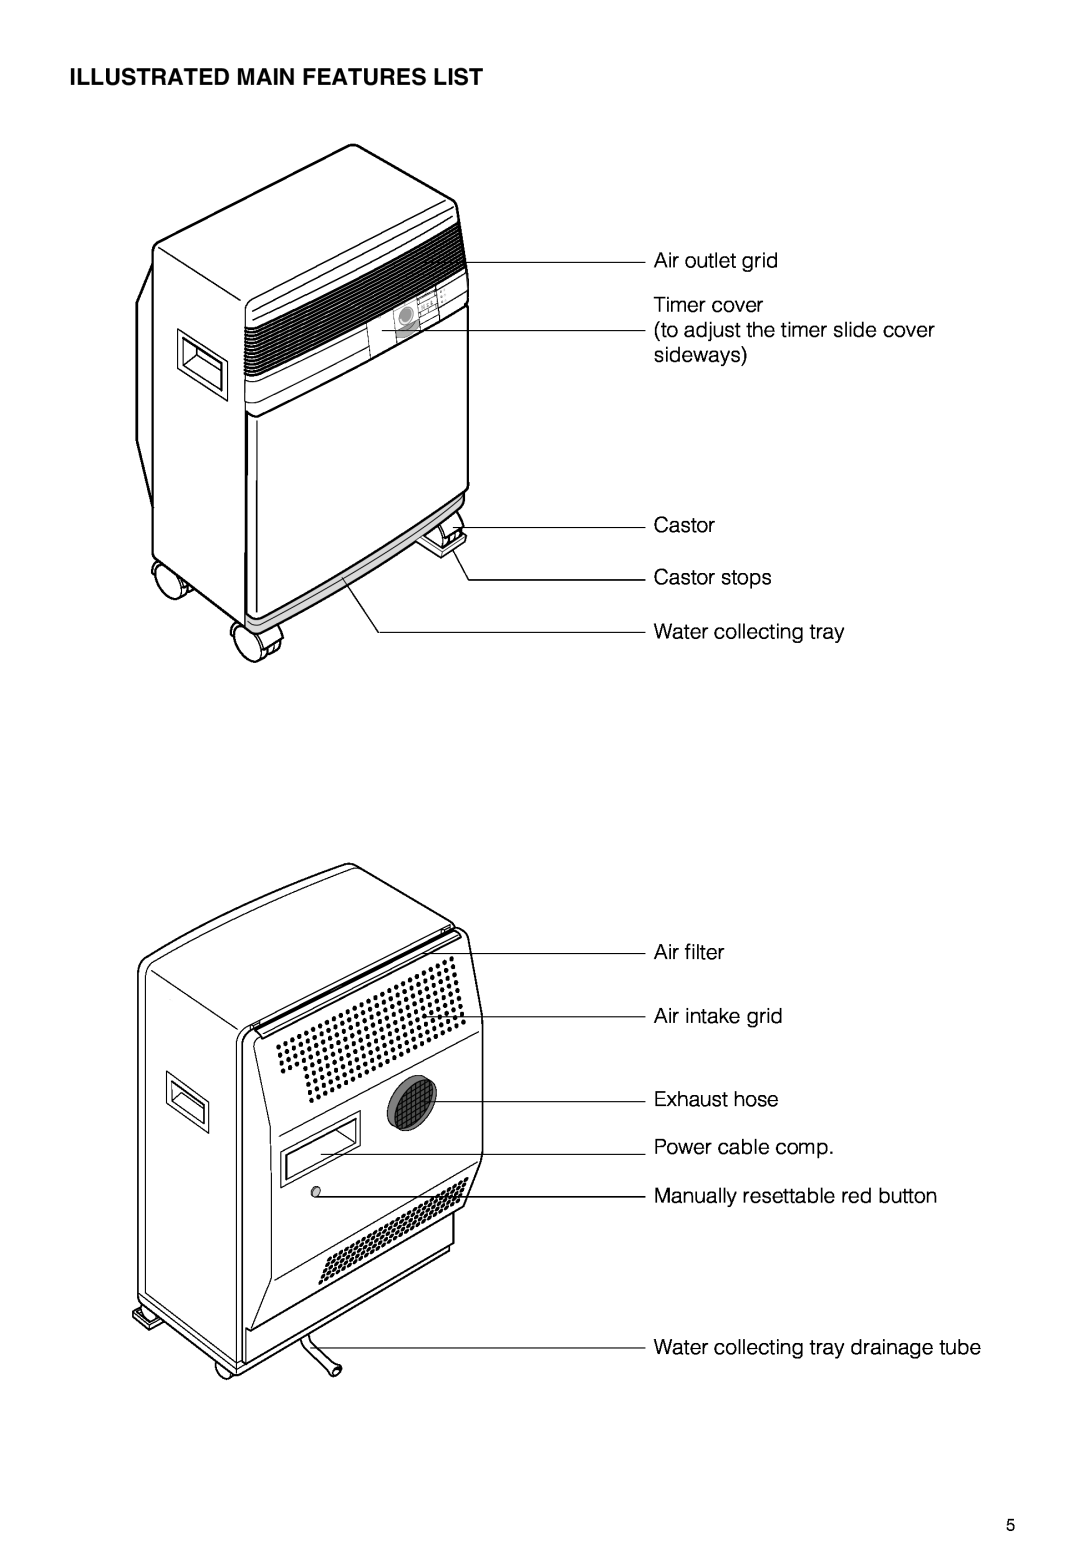 DeLonghi PAC 210 U owner manual Illustrated Main Features List, Air outlet grid Timer cover, Manually resettable red button 